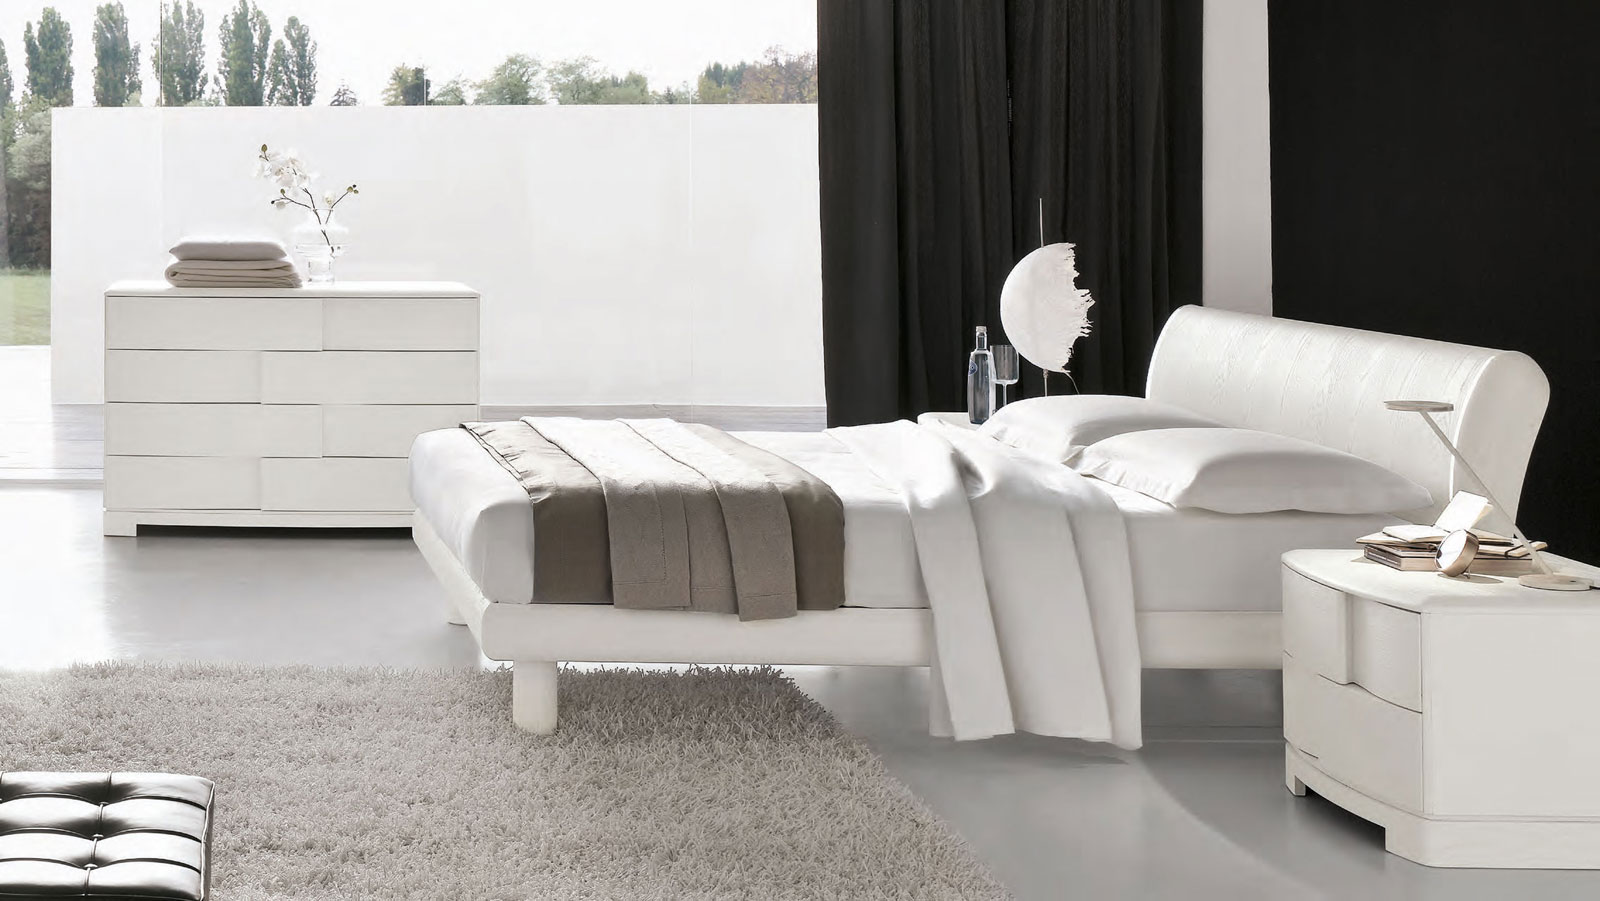 Queen Bed Decorations Breathtaking Queen Bed Sets With Decorations On Nightstands Completed With Cupboards Of White Bedroom Furniture Matched With Black Bedroom Curtains Bedroom 15 Simple White Bedroom Furniture For Your Romantic Modern House